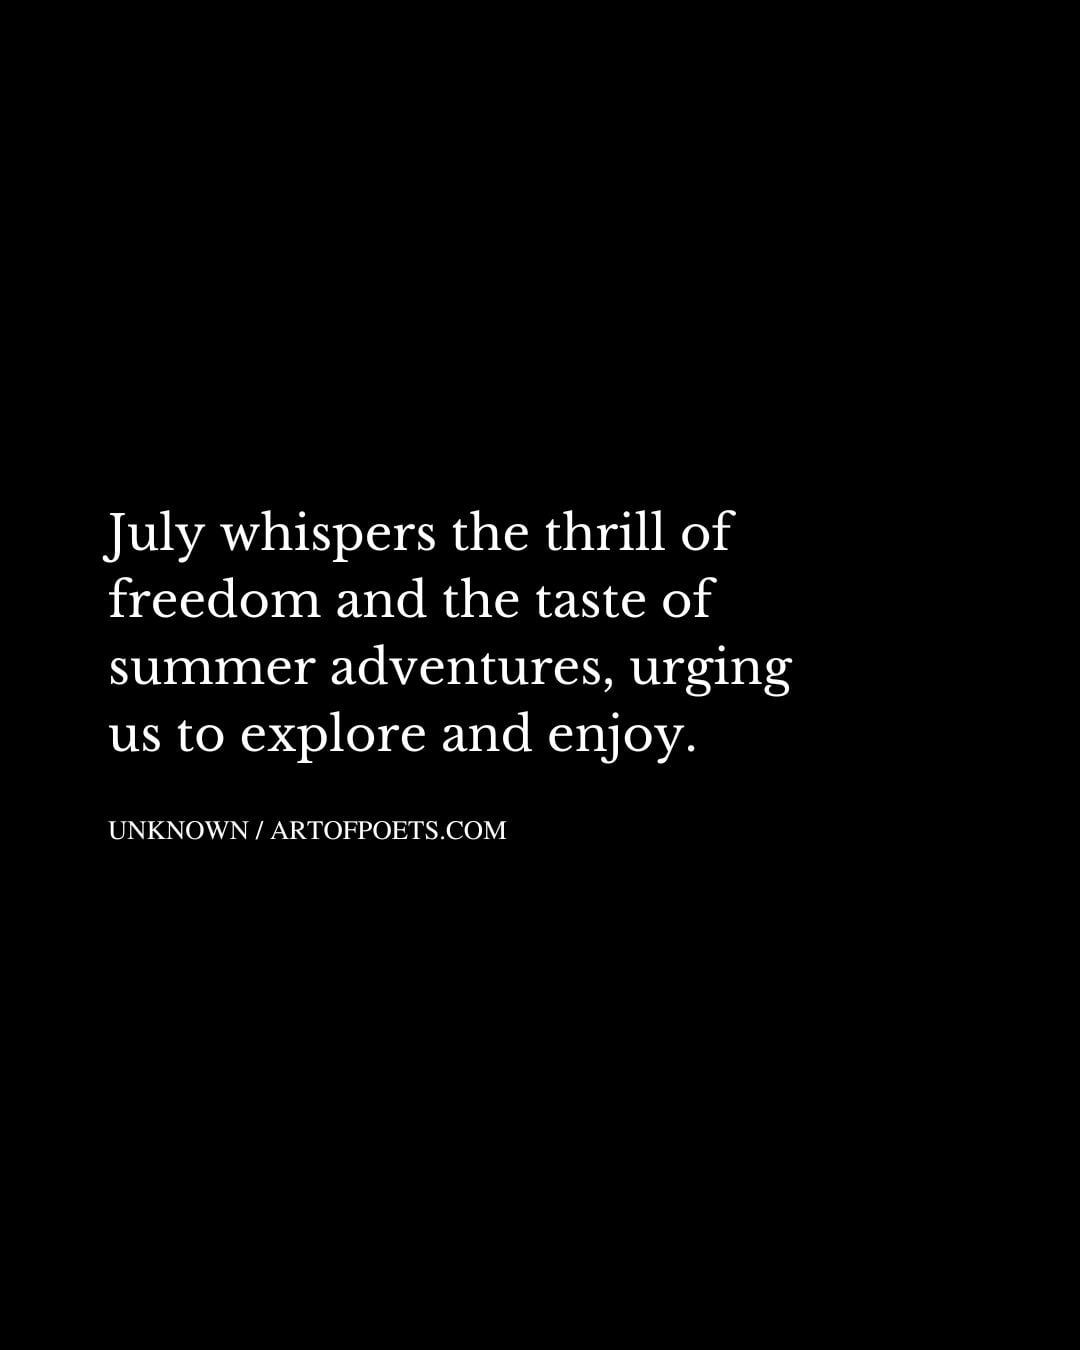 July whispers the thrill of freedom and the taste of summer adventures urging us to explore and enjoy